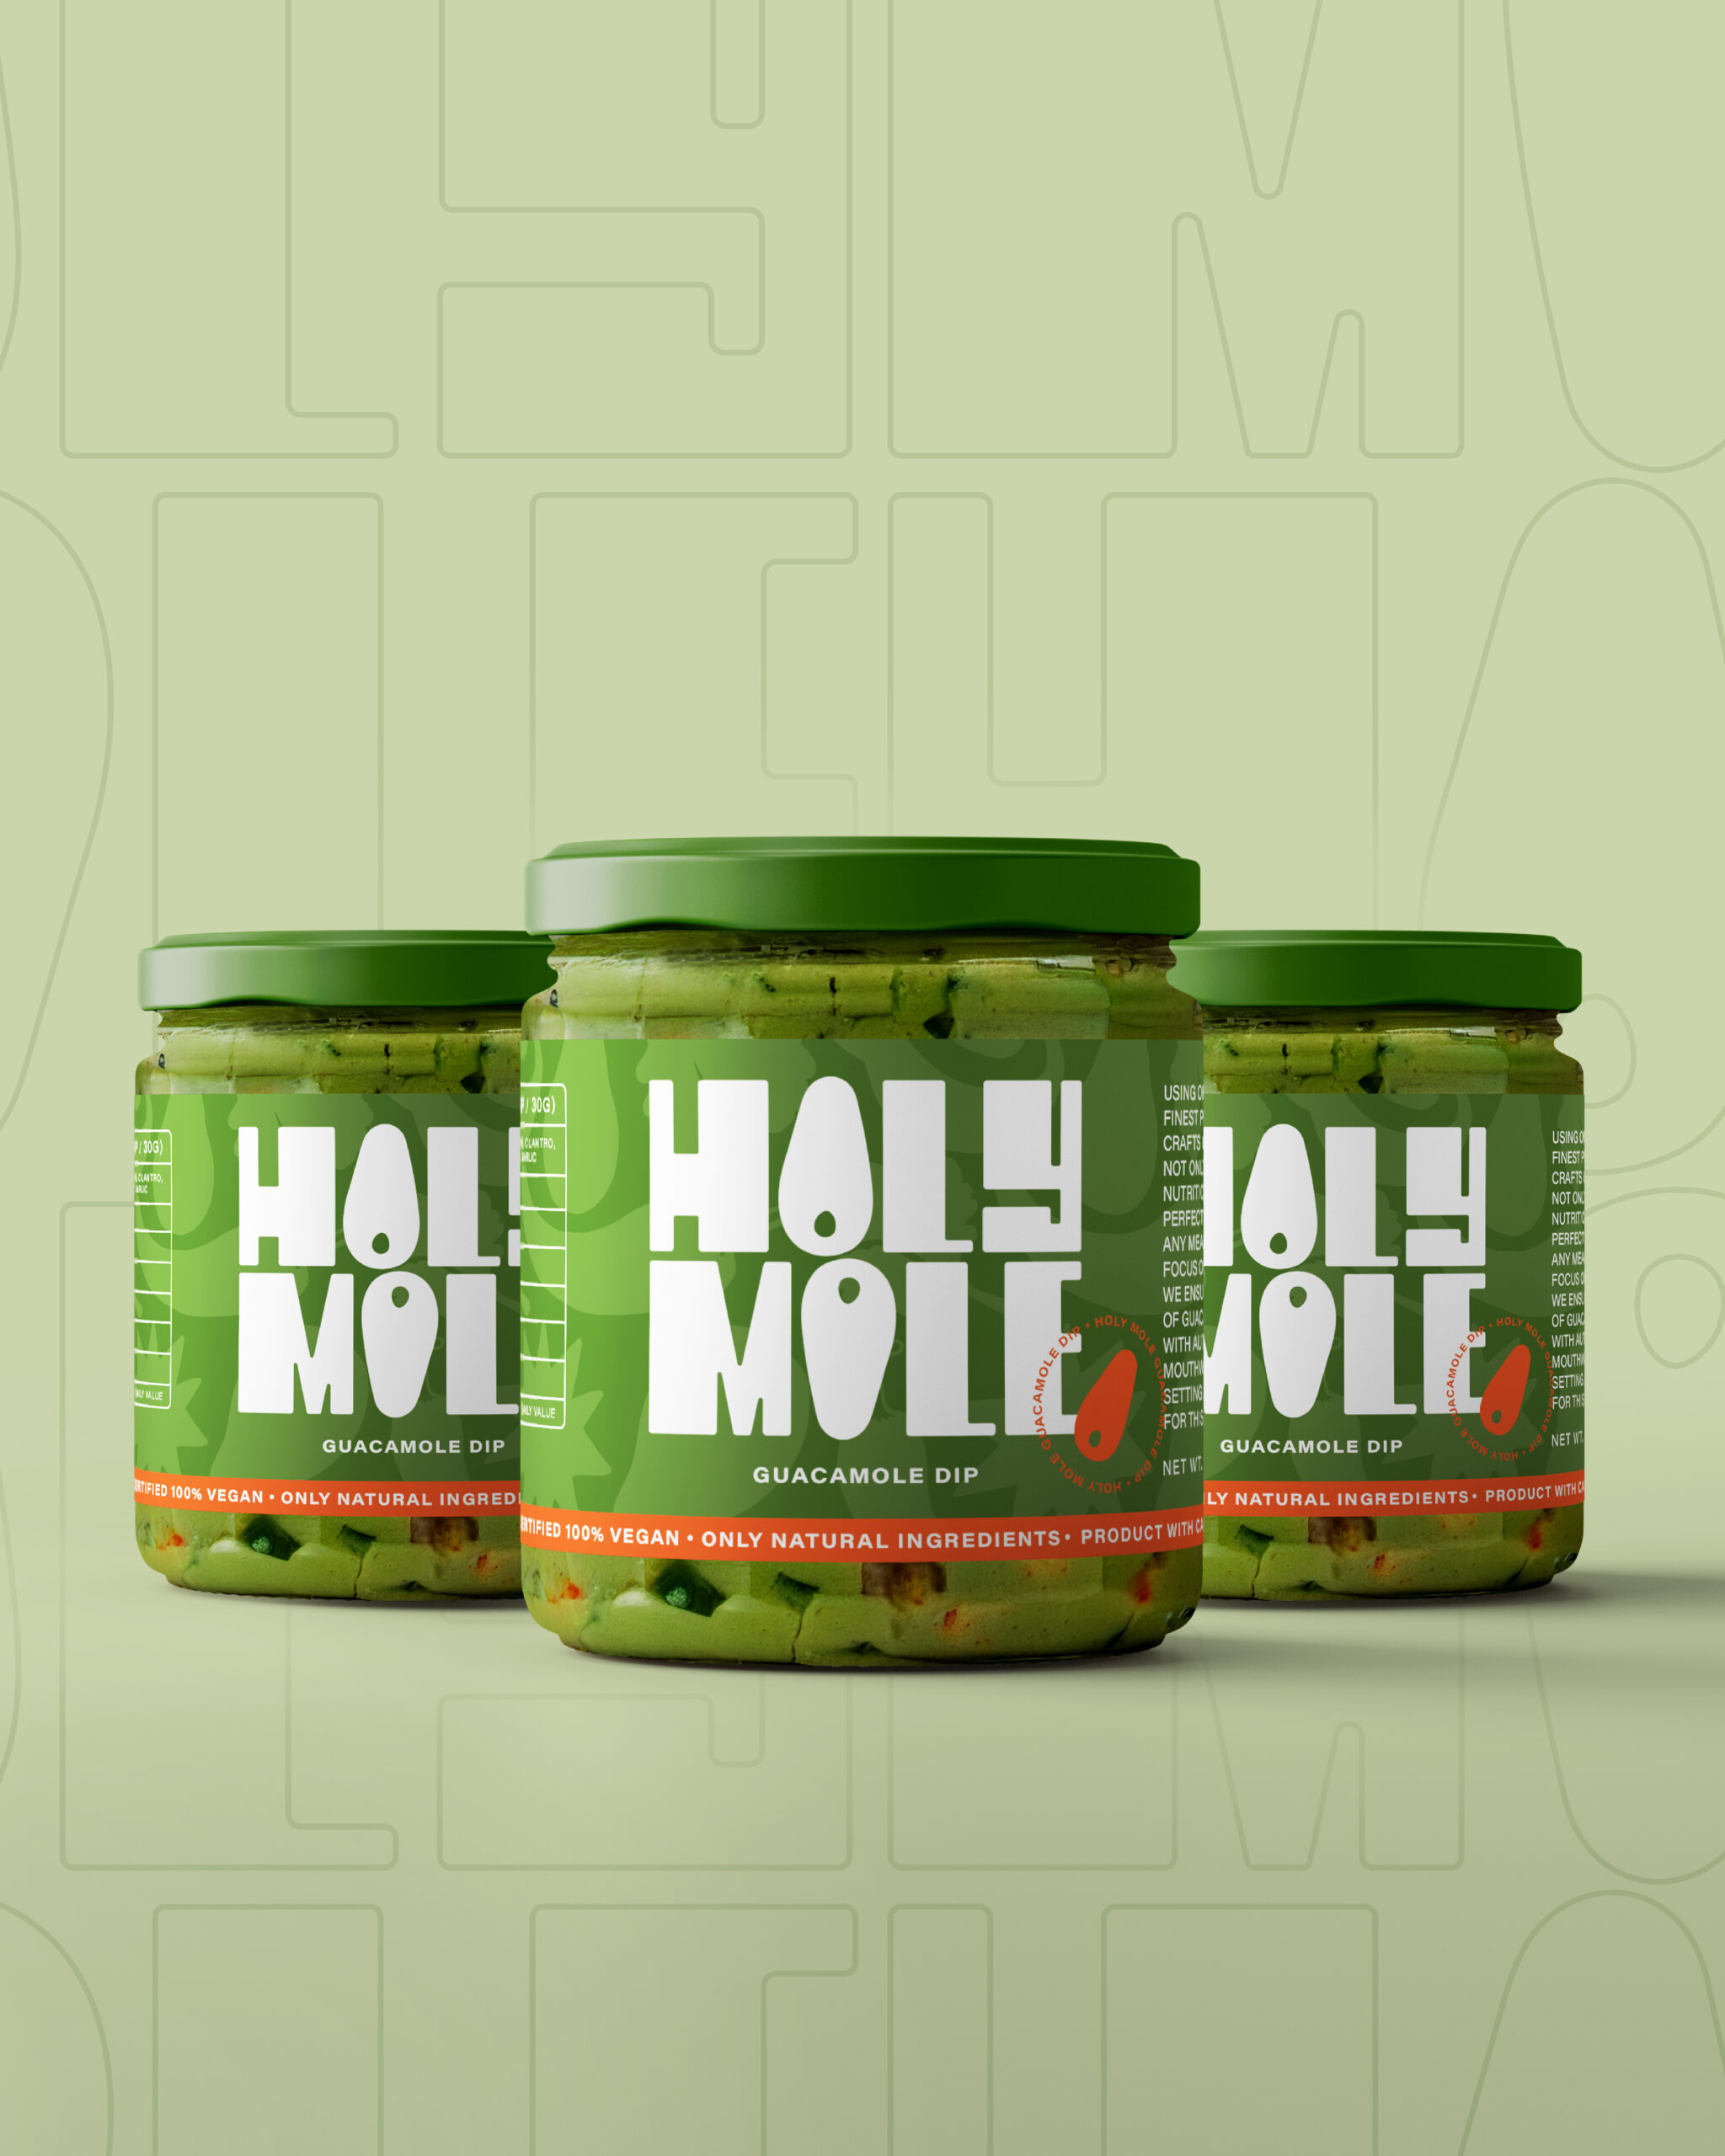 Holy Mole Has Fun with Guacamole in More Ways Than One